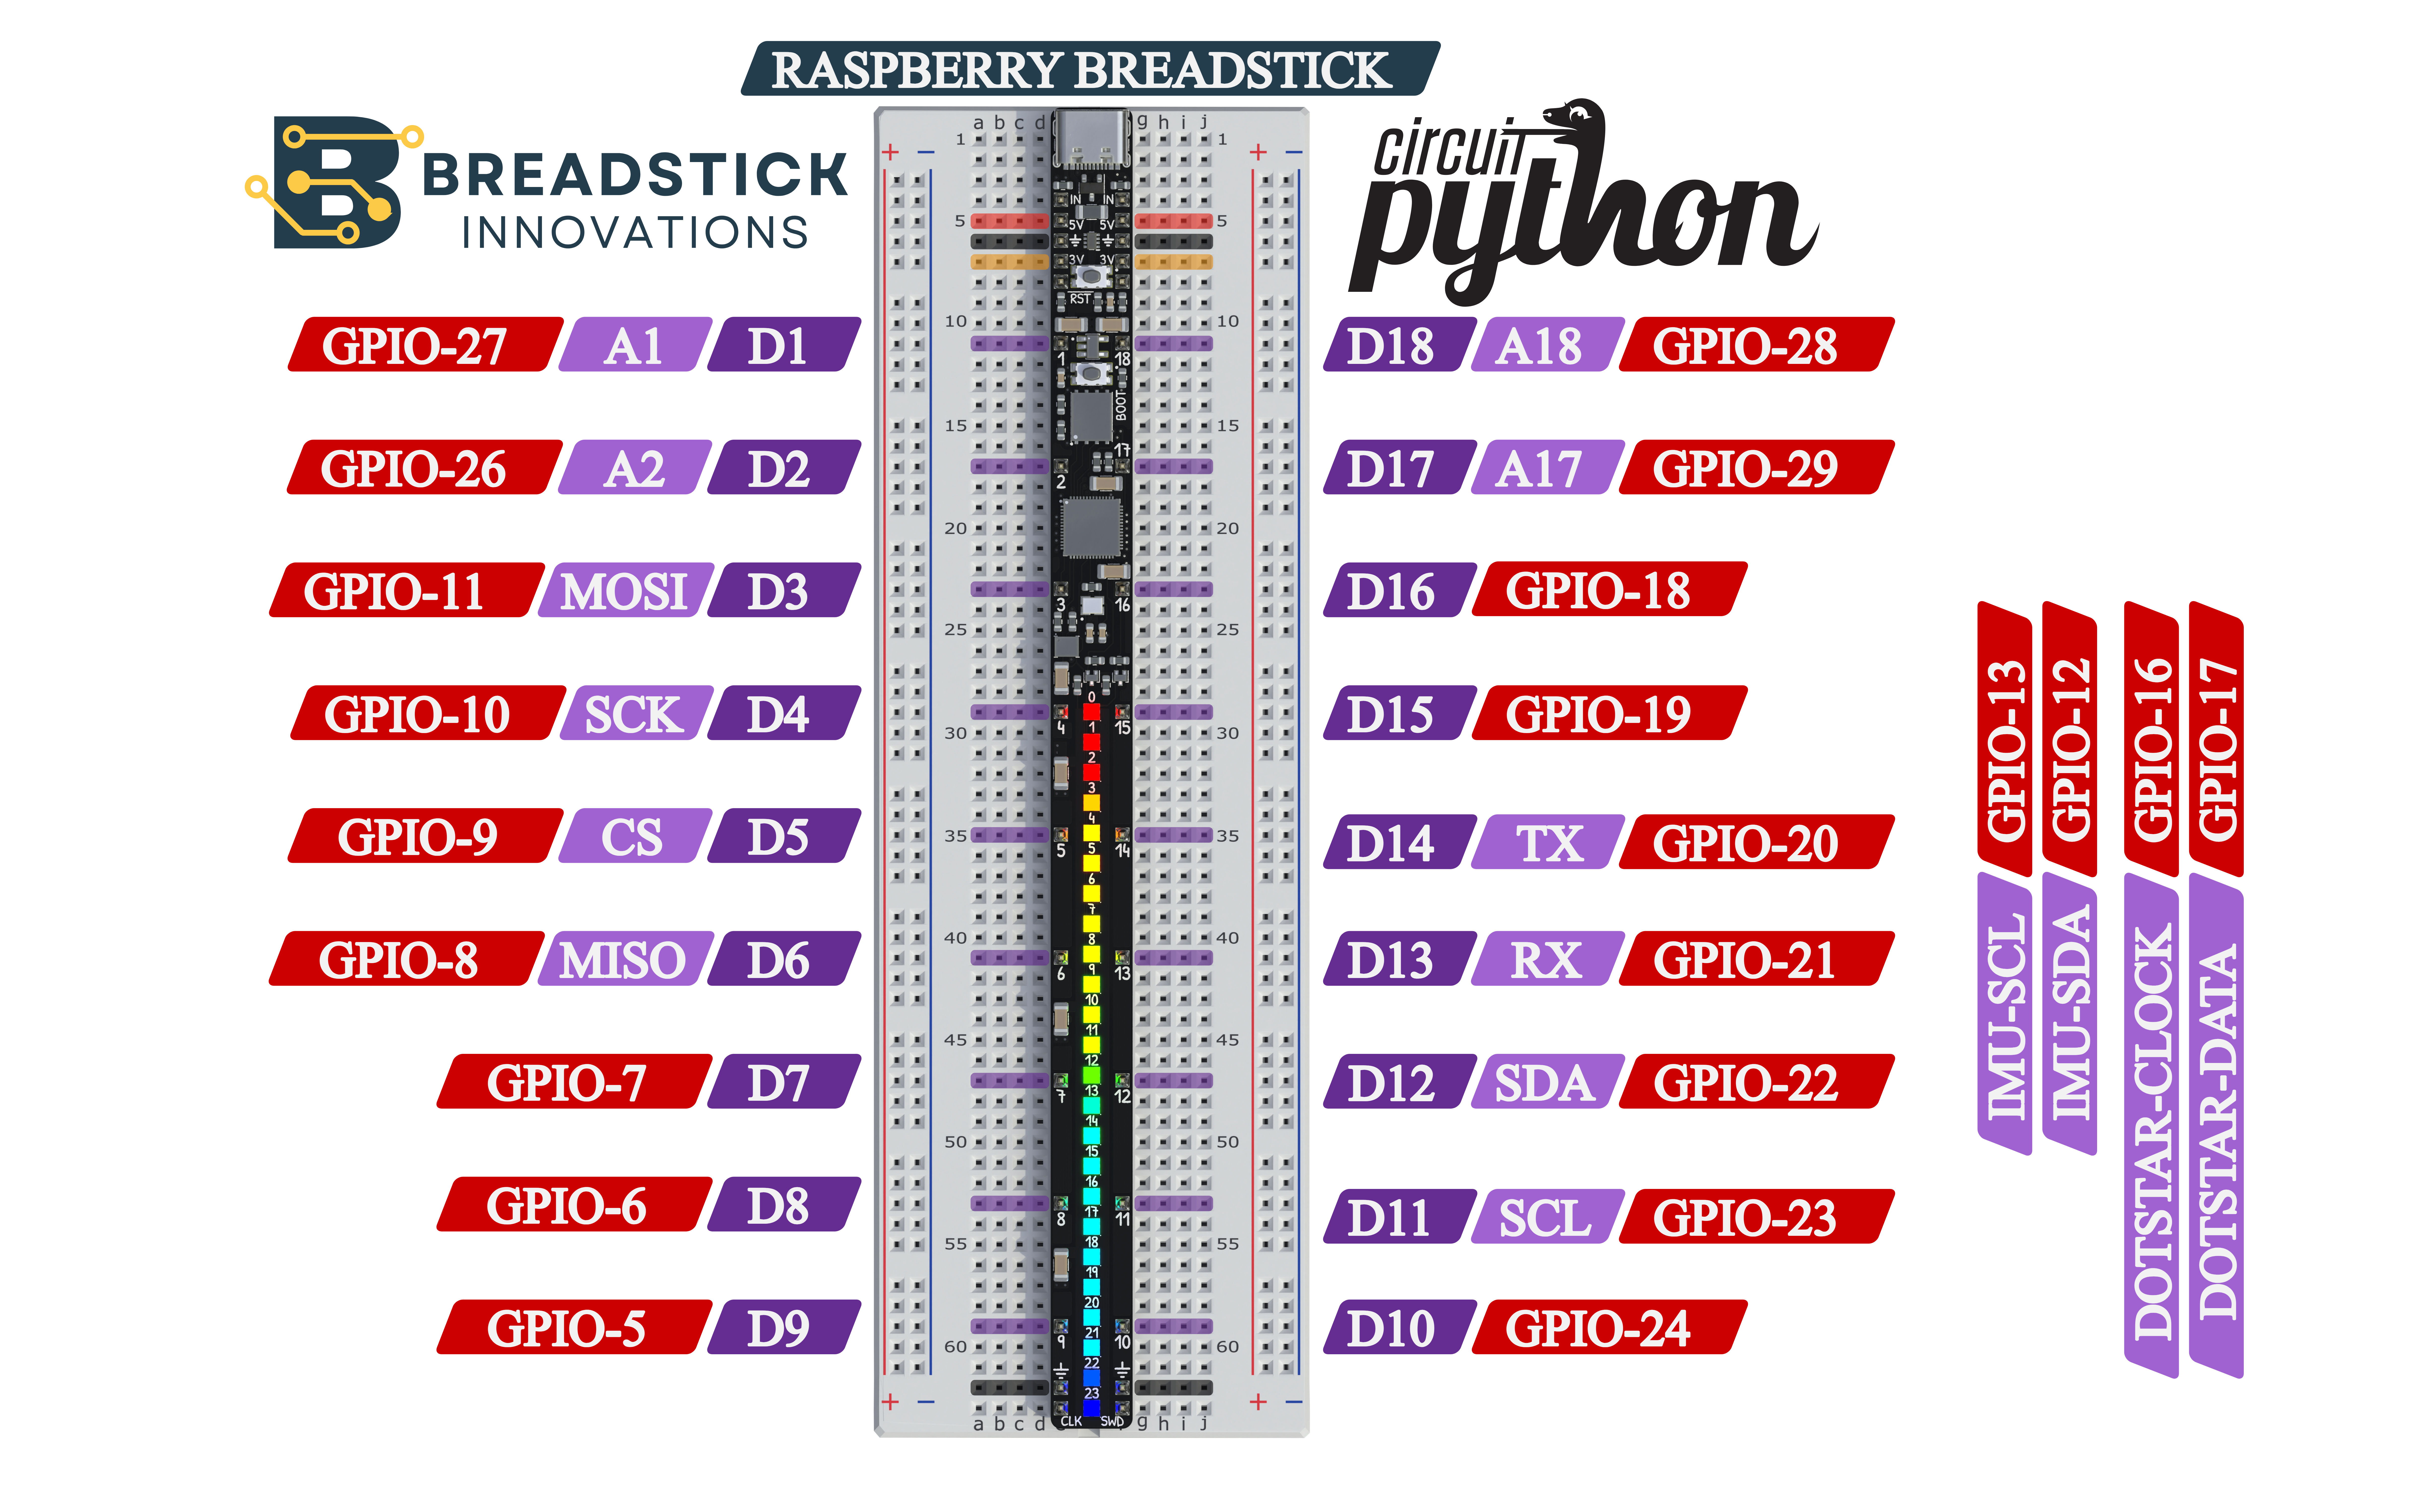 Raspberry Breadstick provides a hassle-free development experience by fully supporting both CircuitPython and MicroPython.